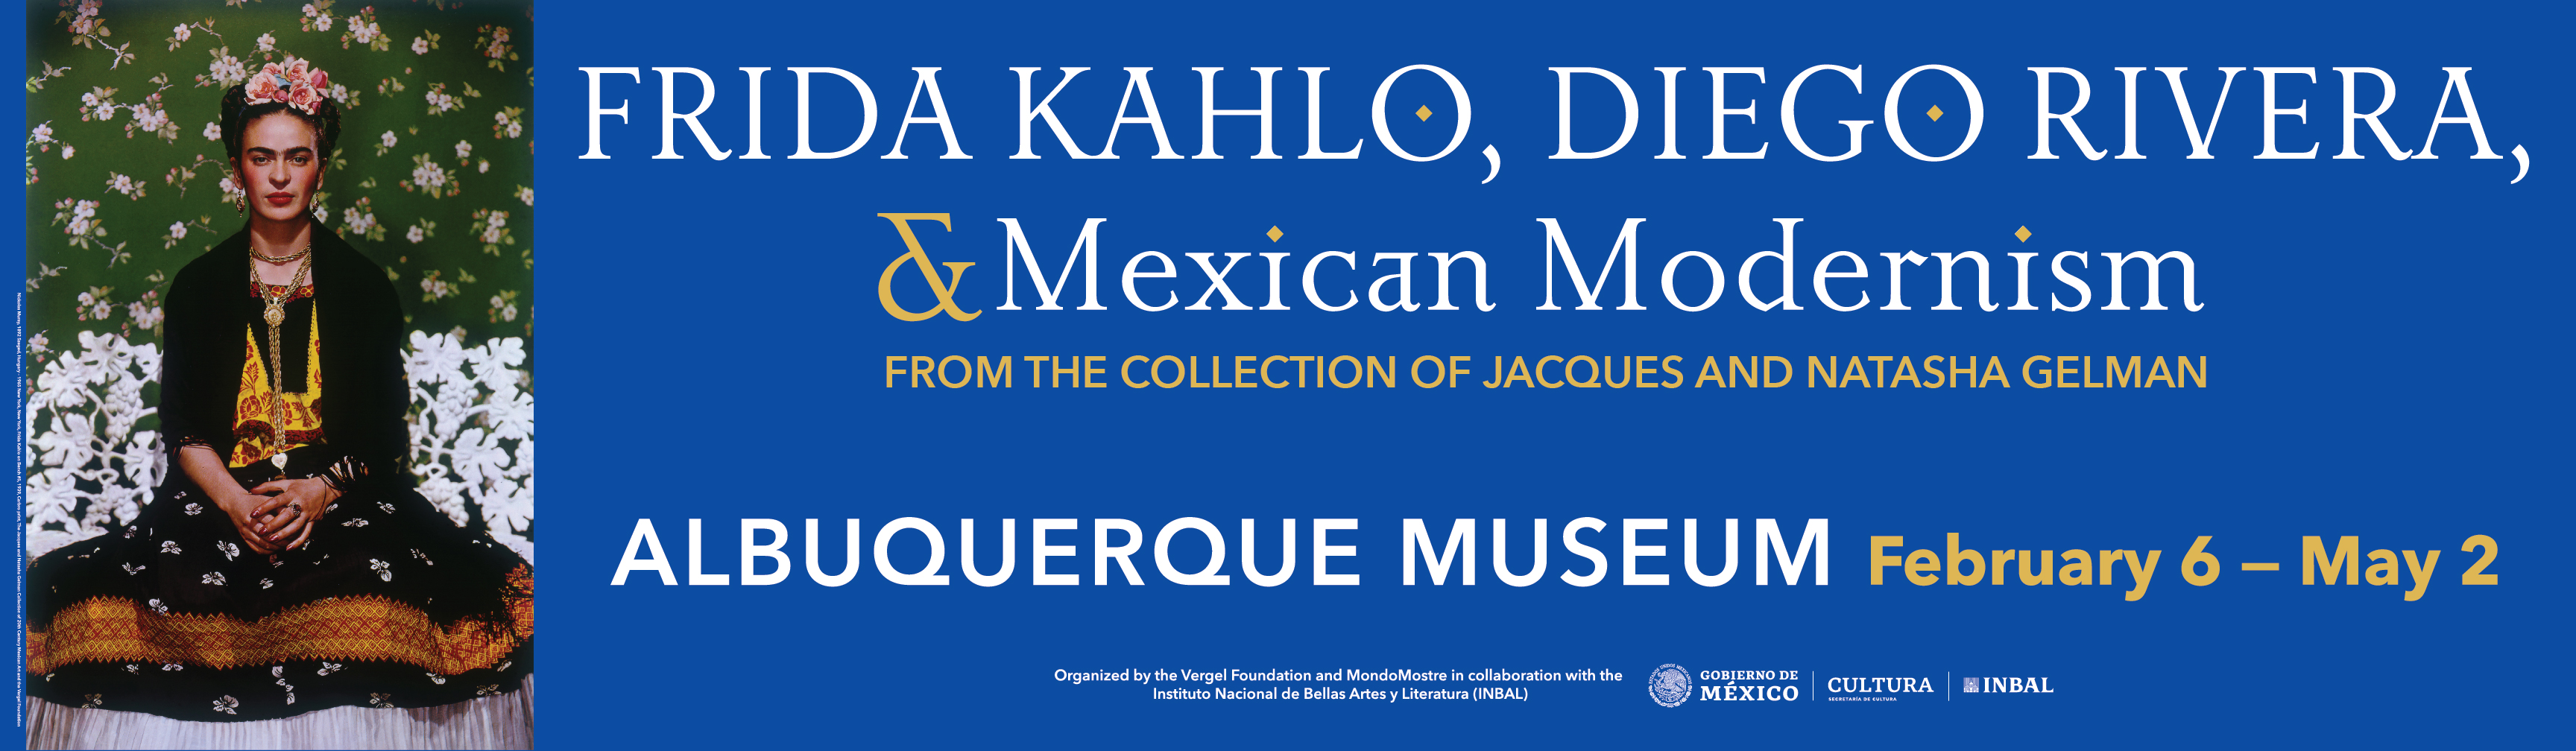 Frida Kahlo, Diego Rivera, and Mexican Modernism Banner